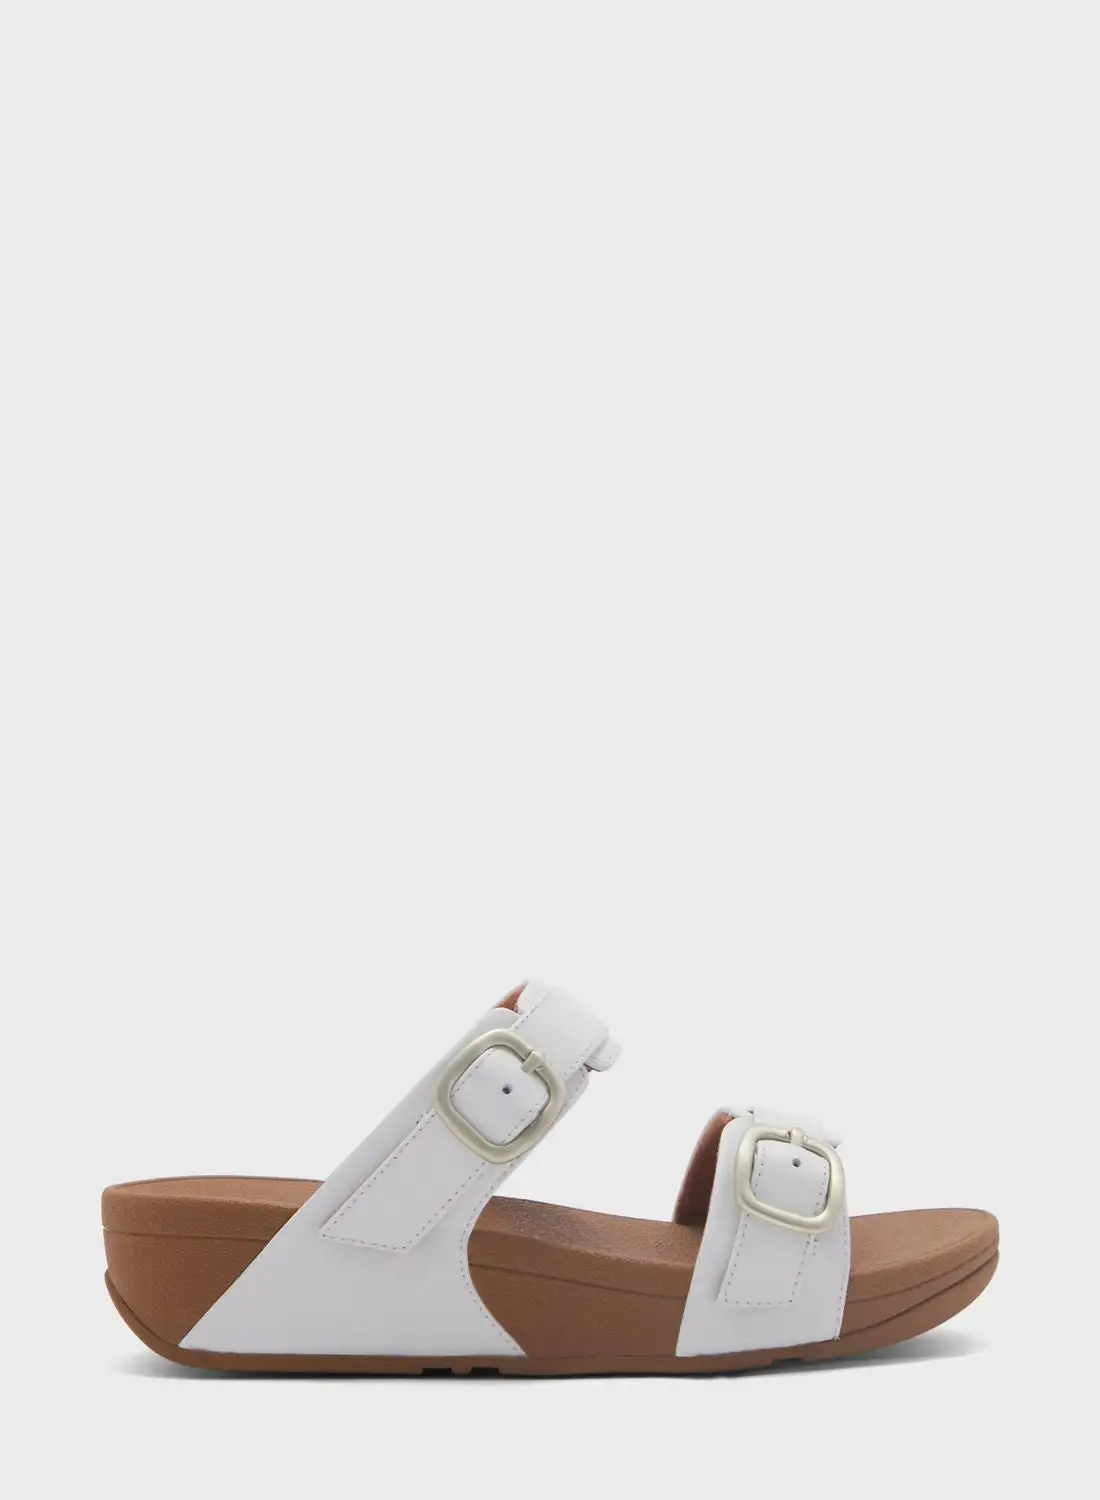 fitflop Multi Strap Wedge Sandals